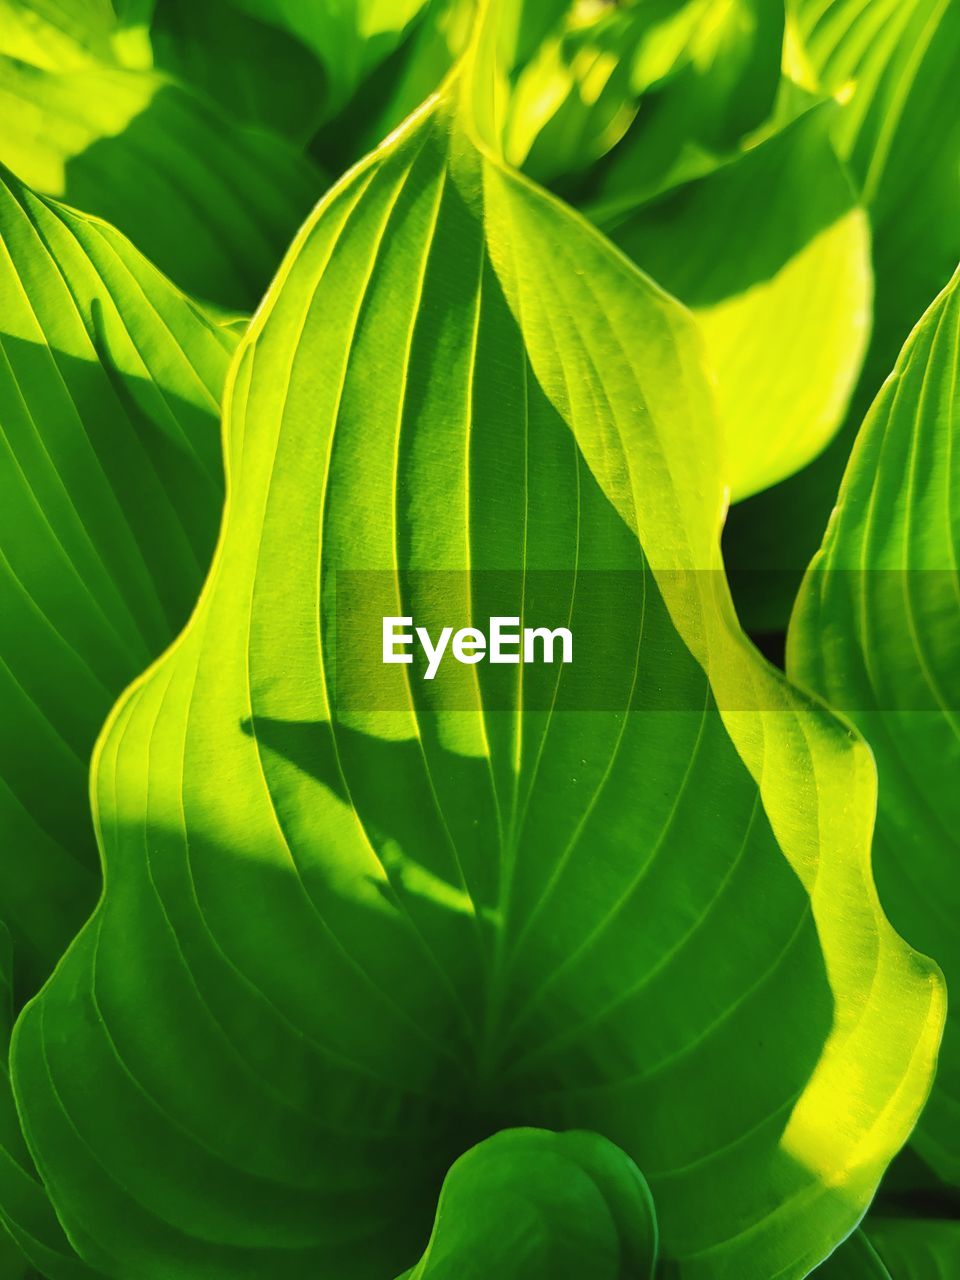 green, leaf, plant part, plant, yellow, flower, growth, nature, beauty in nature, close-up, no people, backgrounds, freshness, full frame, environment, sunlight, outdoors, aquatic plant, tree, leaf vein, tropical climate, botany, vibrant color, petal, plant stem, lush foliage, macro photography, pattern, foliage, food